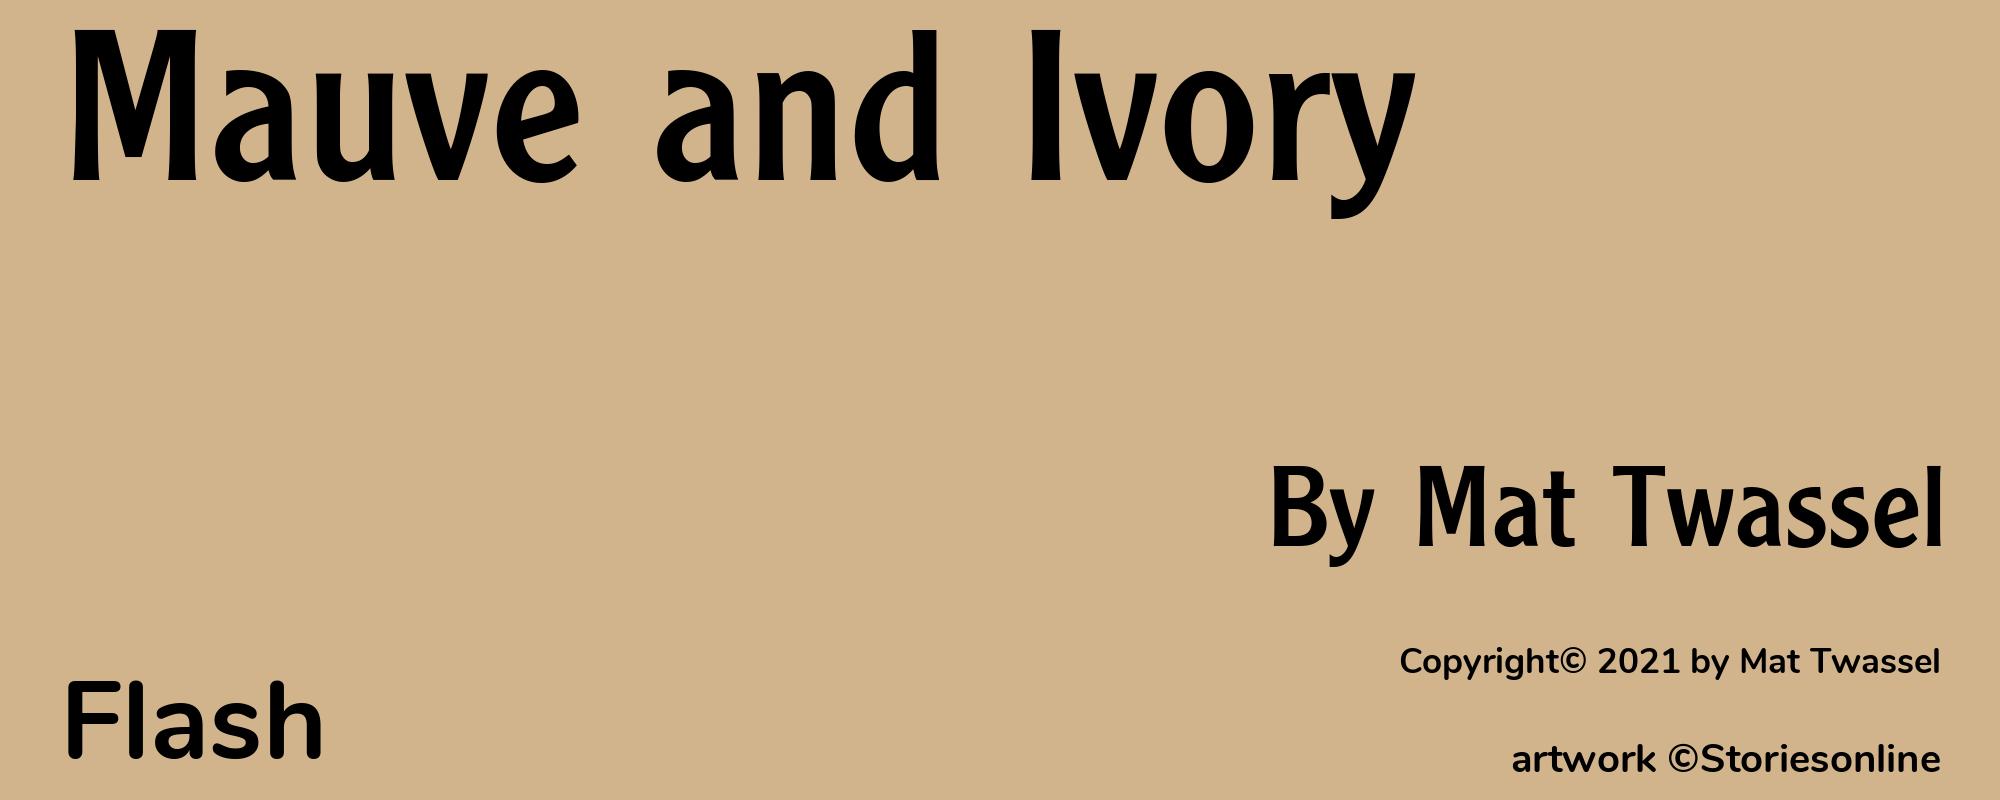 Mauve and Ivory - Cover